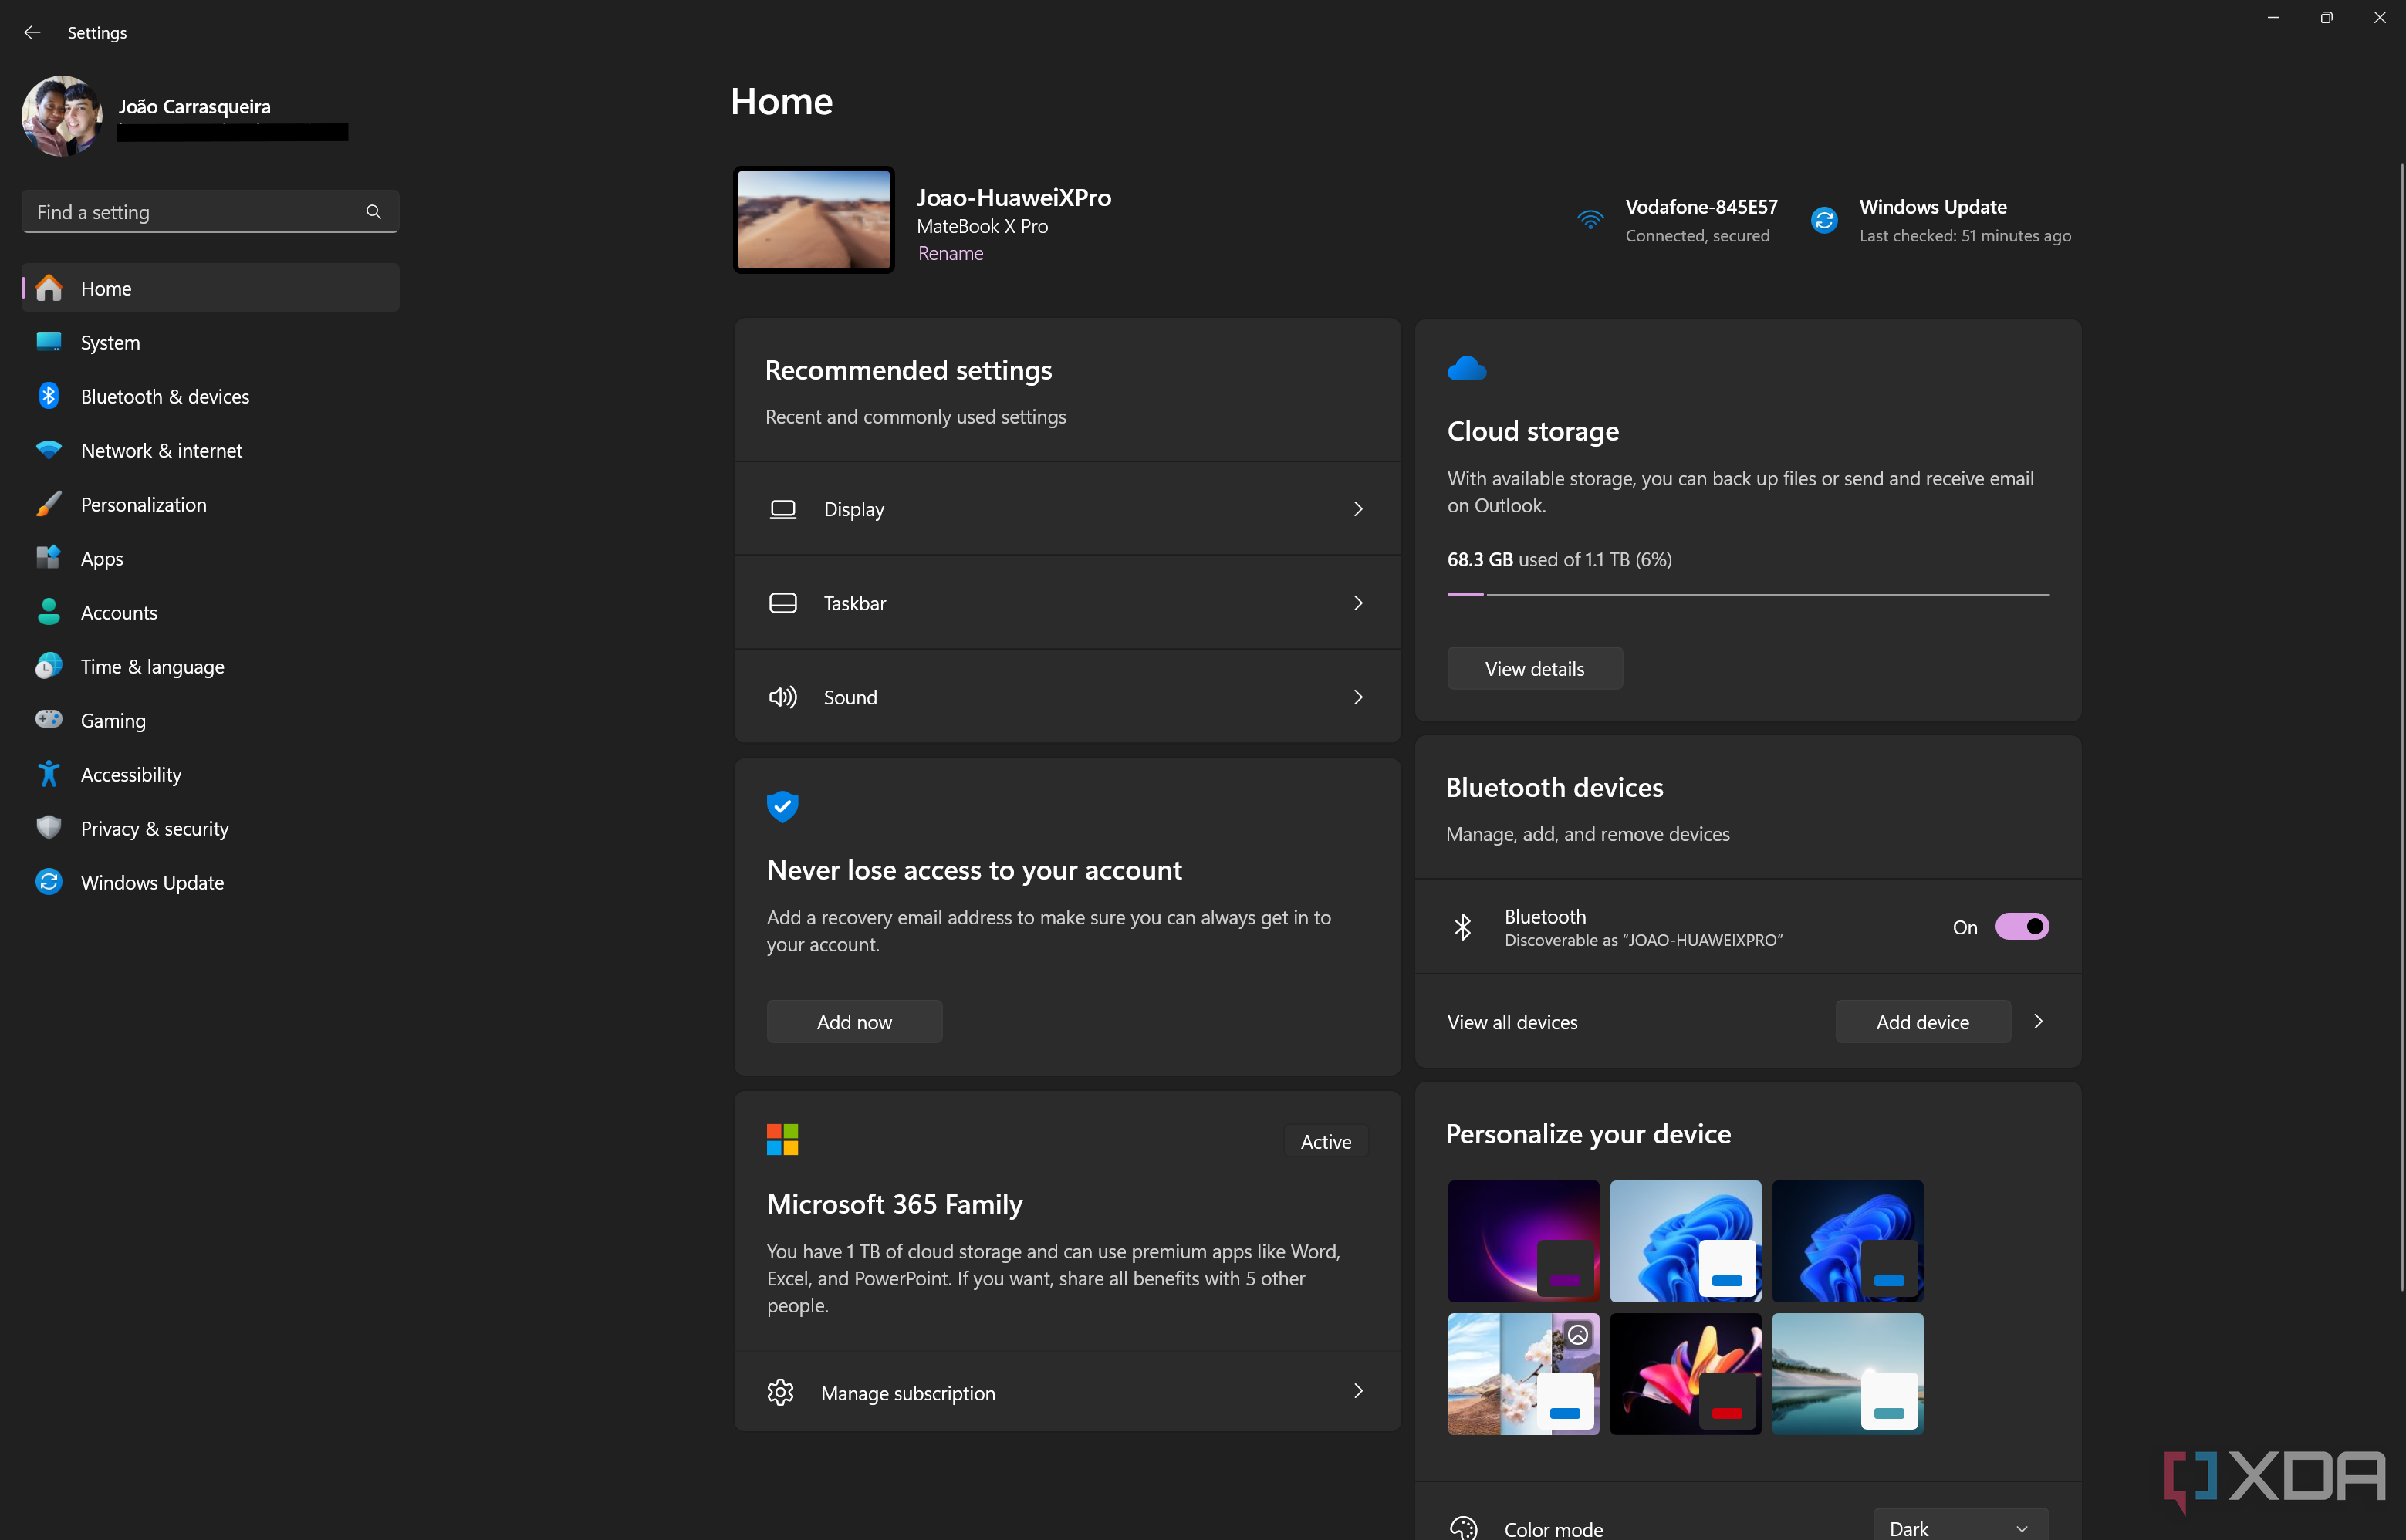 Screenshot of the Home section in the Windows 11 Settings app